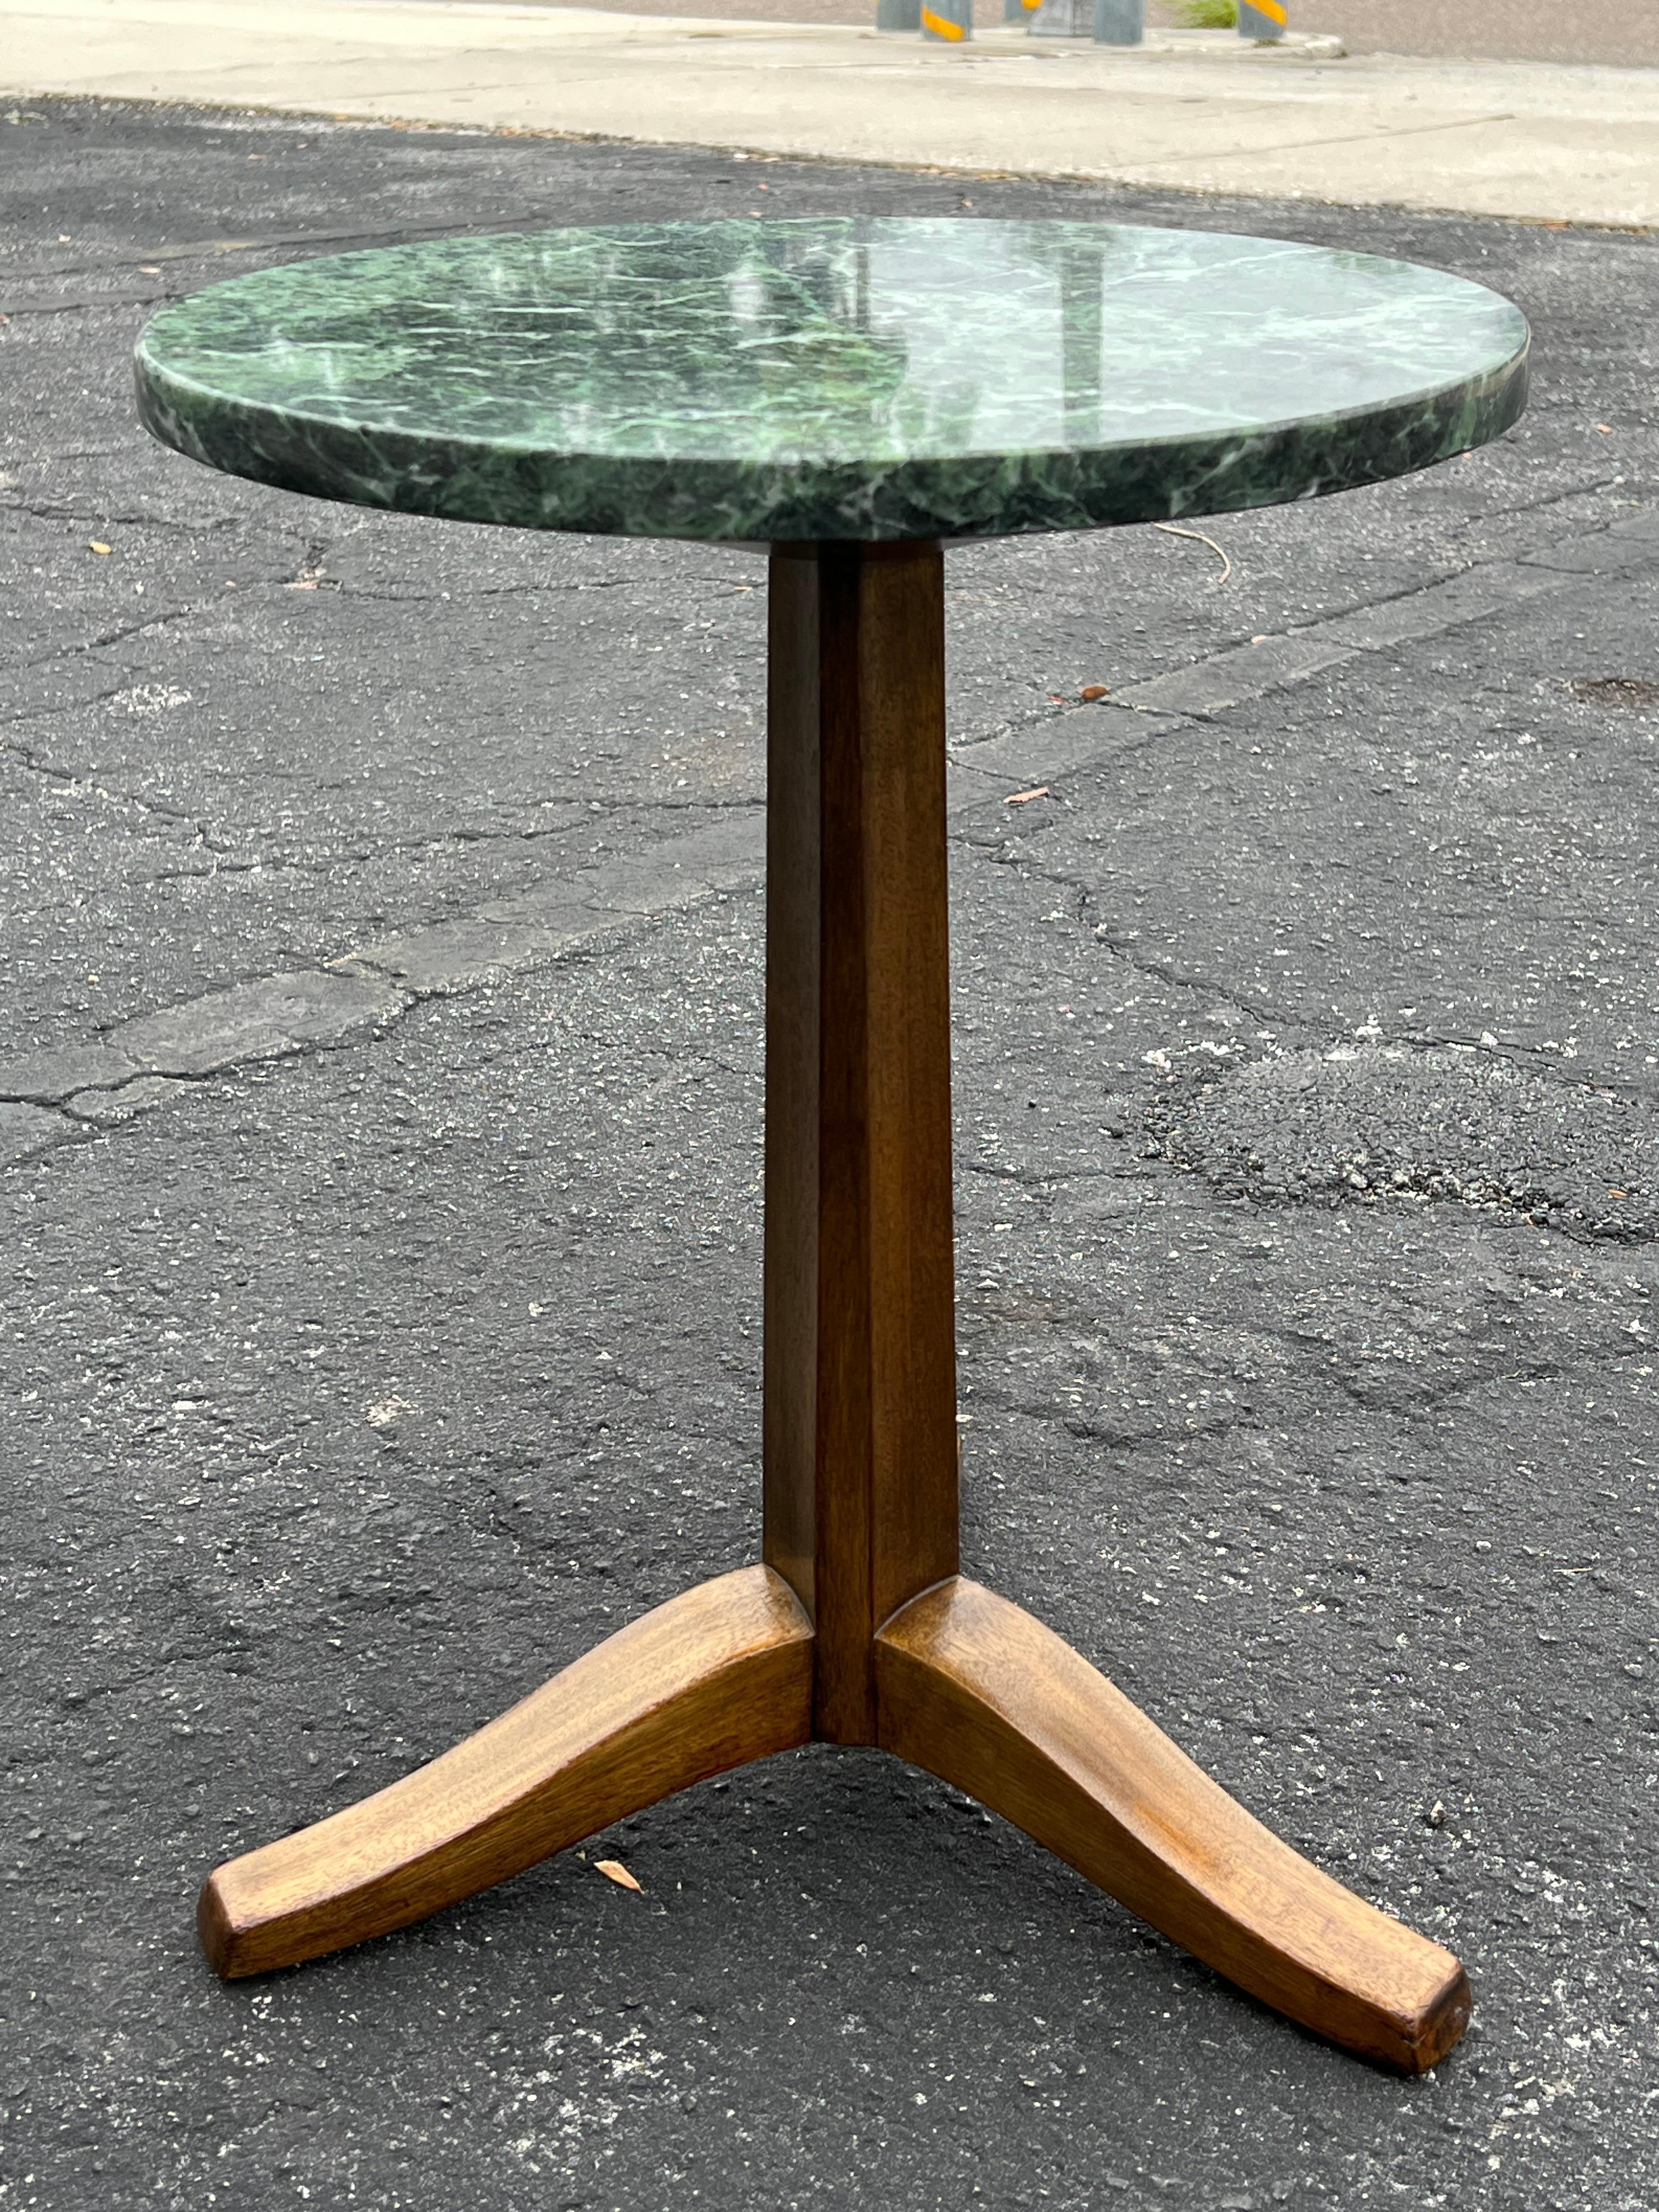 A pair of classic Edward Wormley for Dunbar gueridons or tripod base tables. Green marble tops.